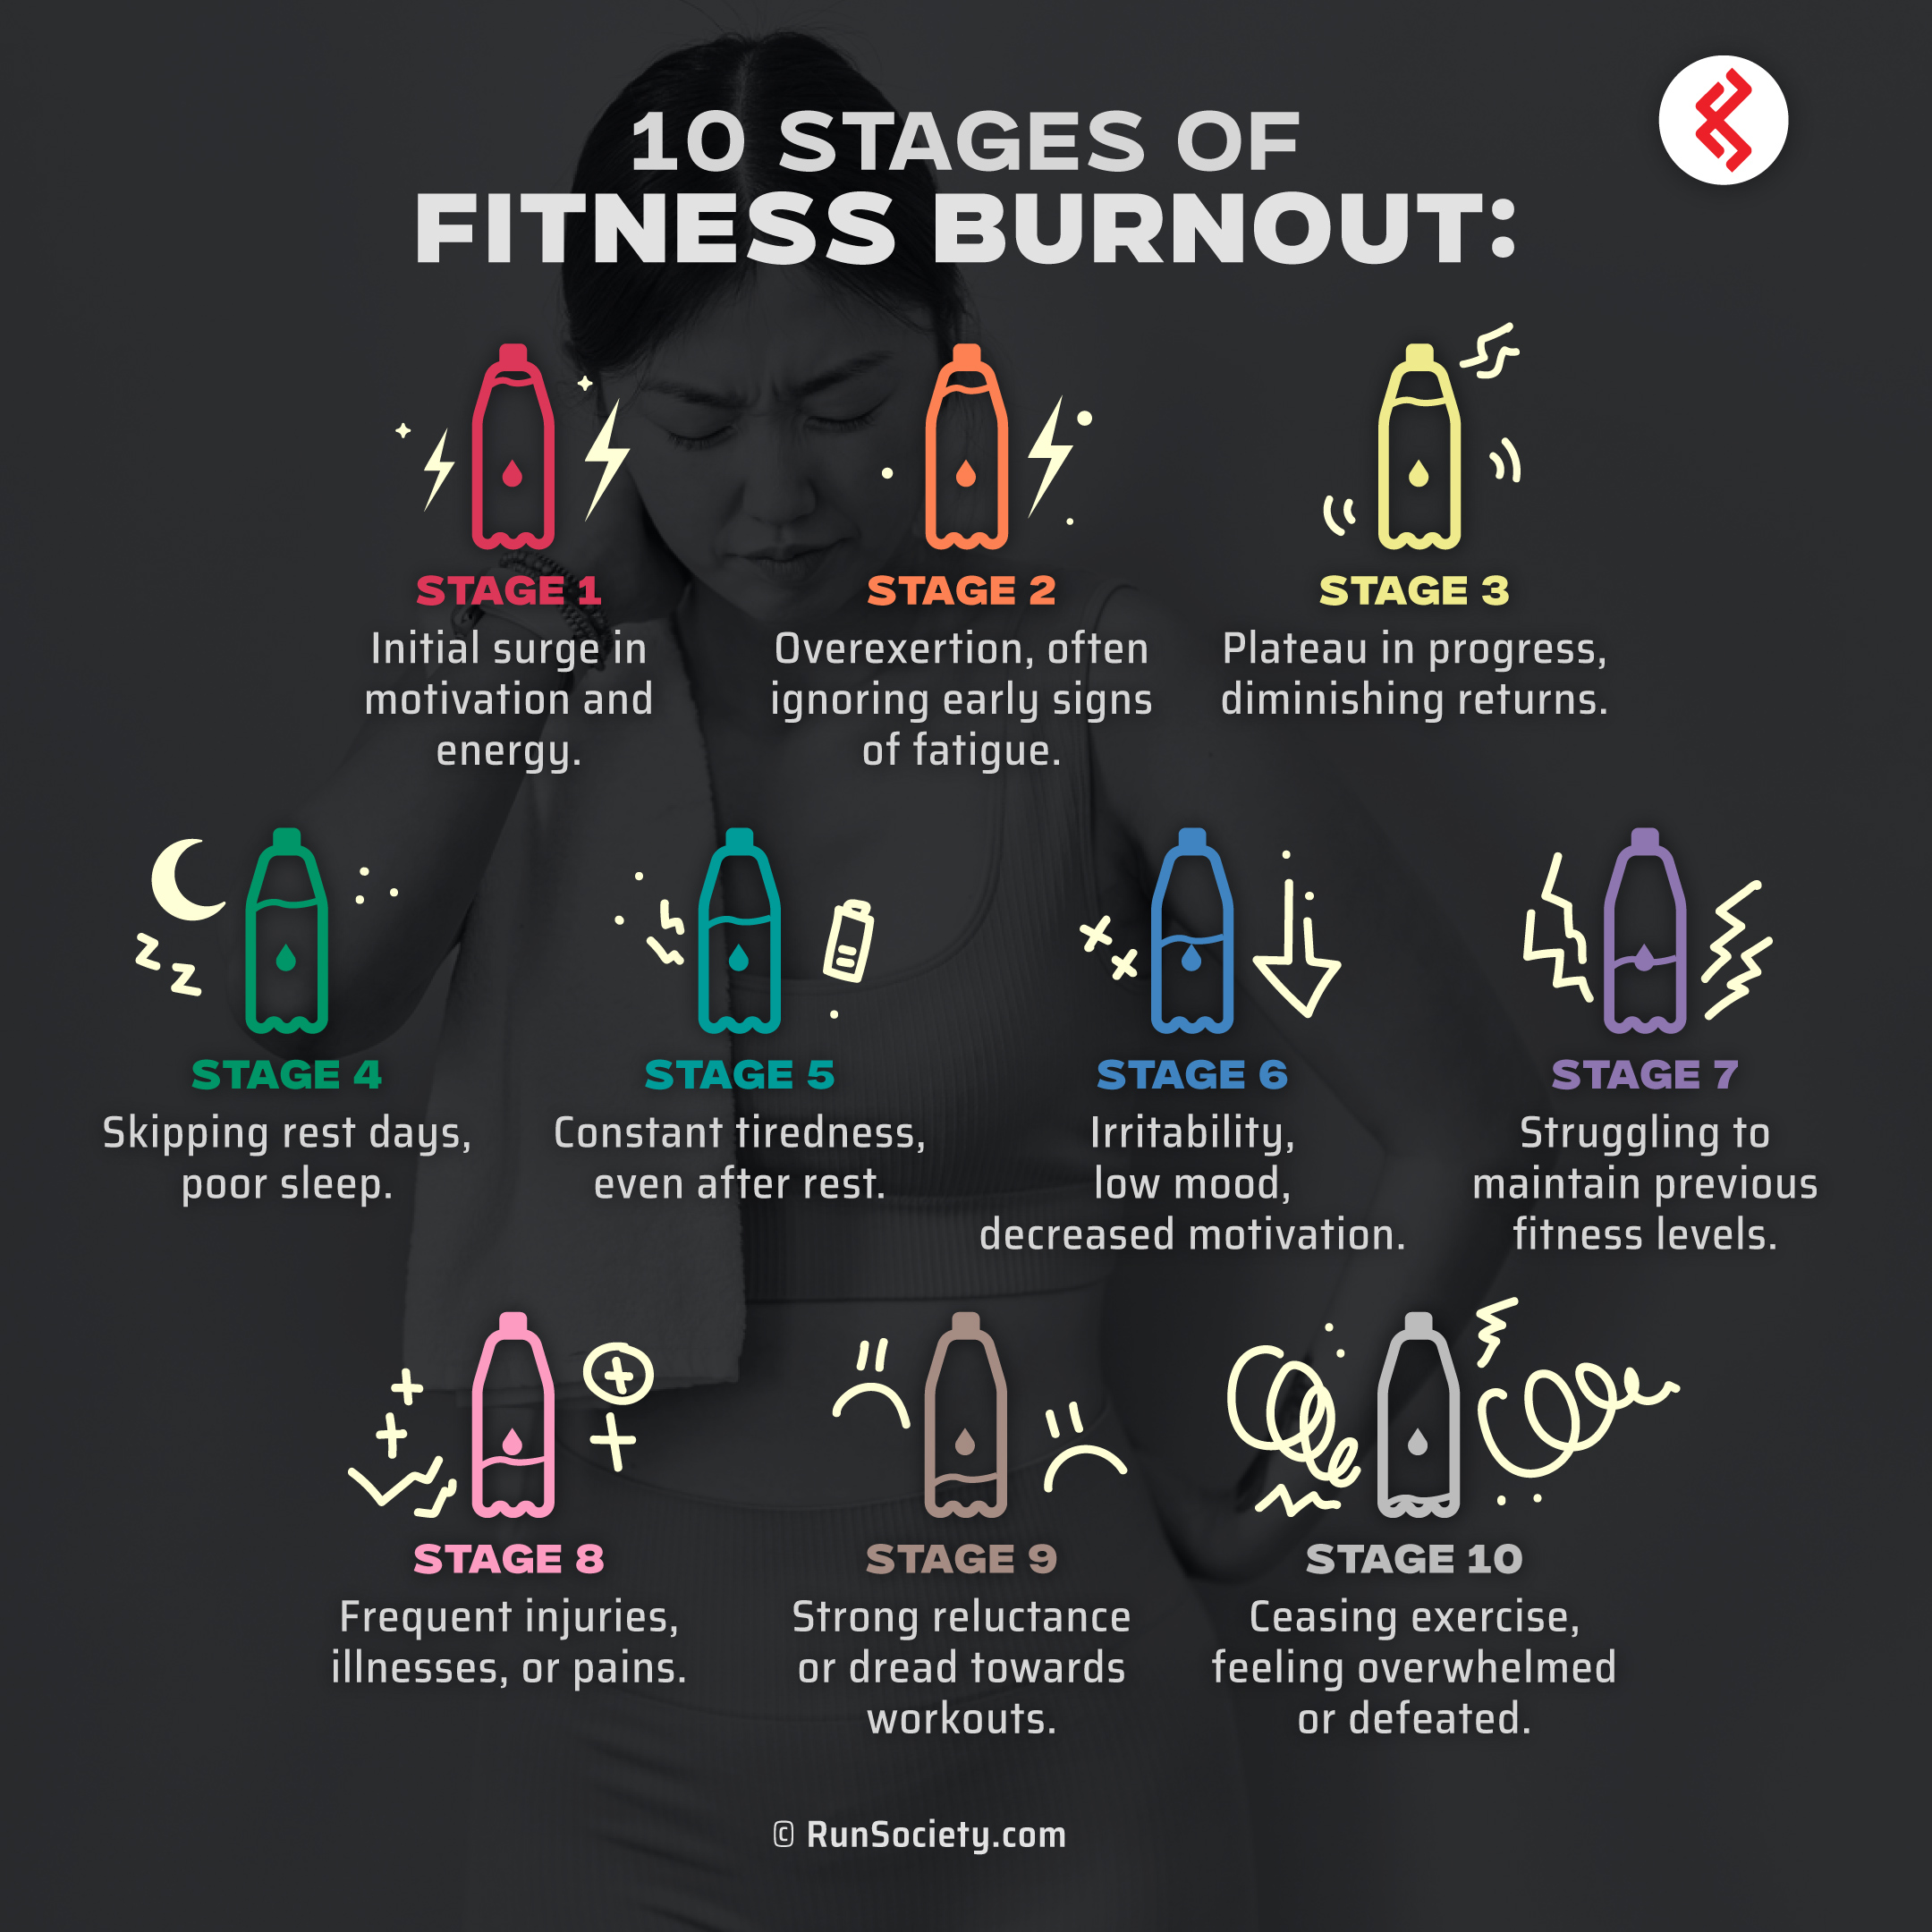 10 Stages of Fitness Burnout